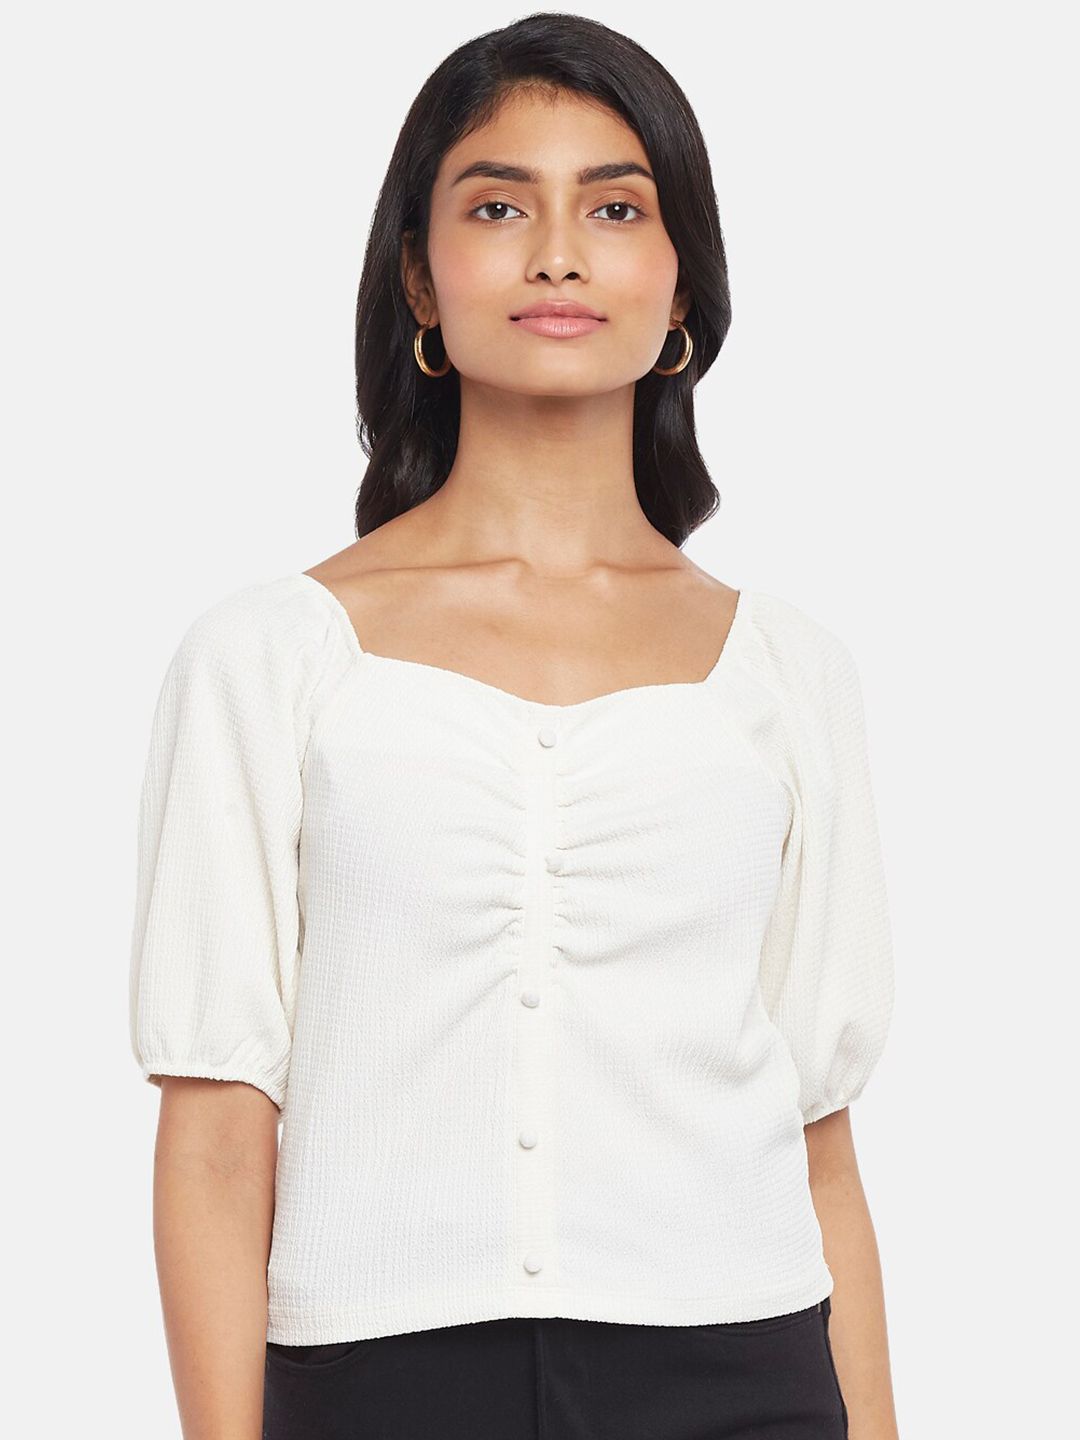 Honey by Pantaloons Off White Solid Sweetheart Neck Top Price in India